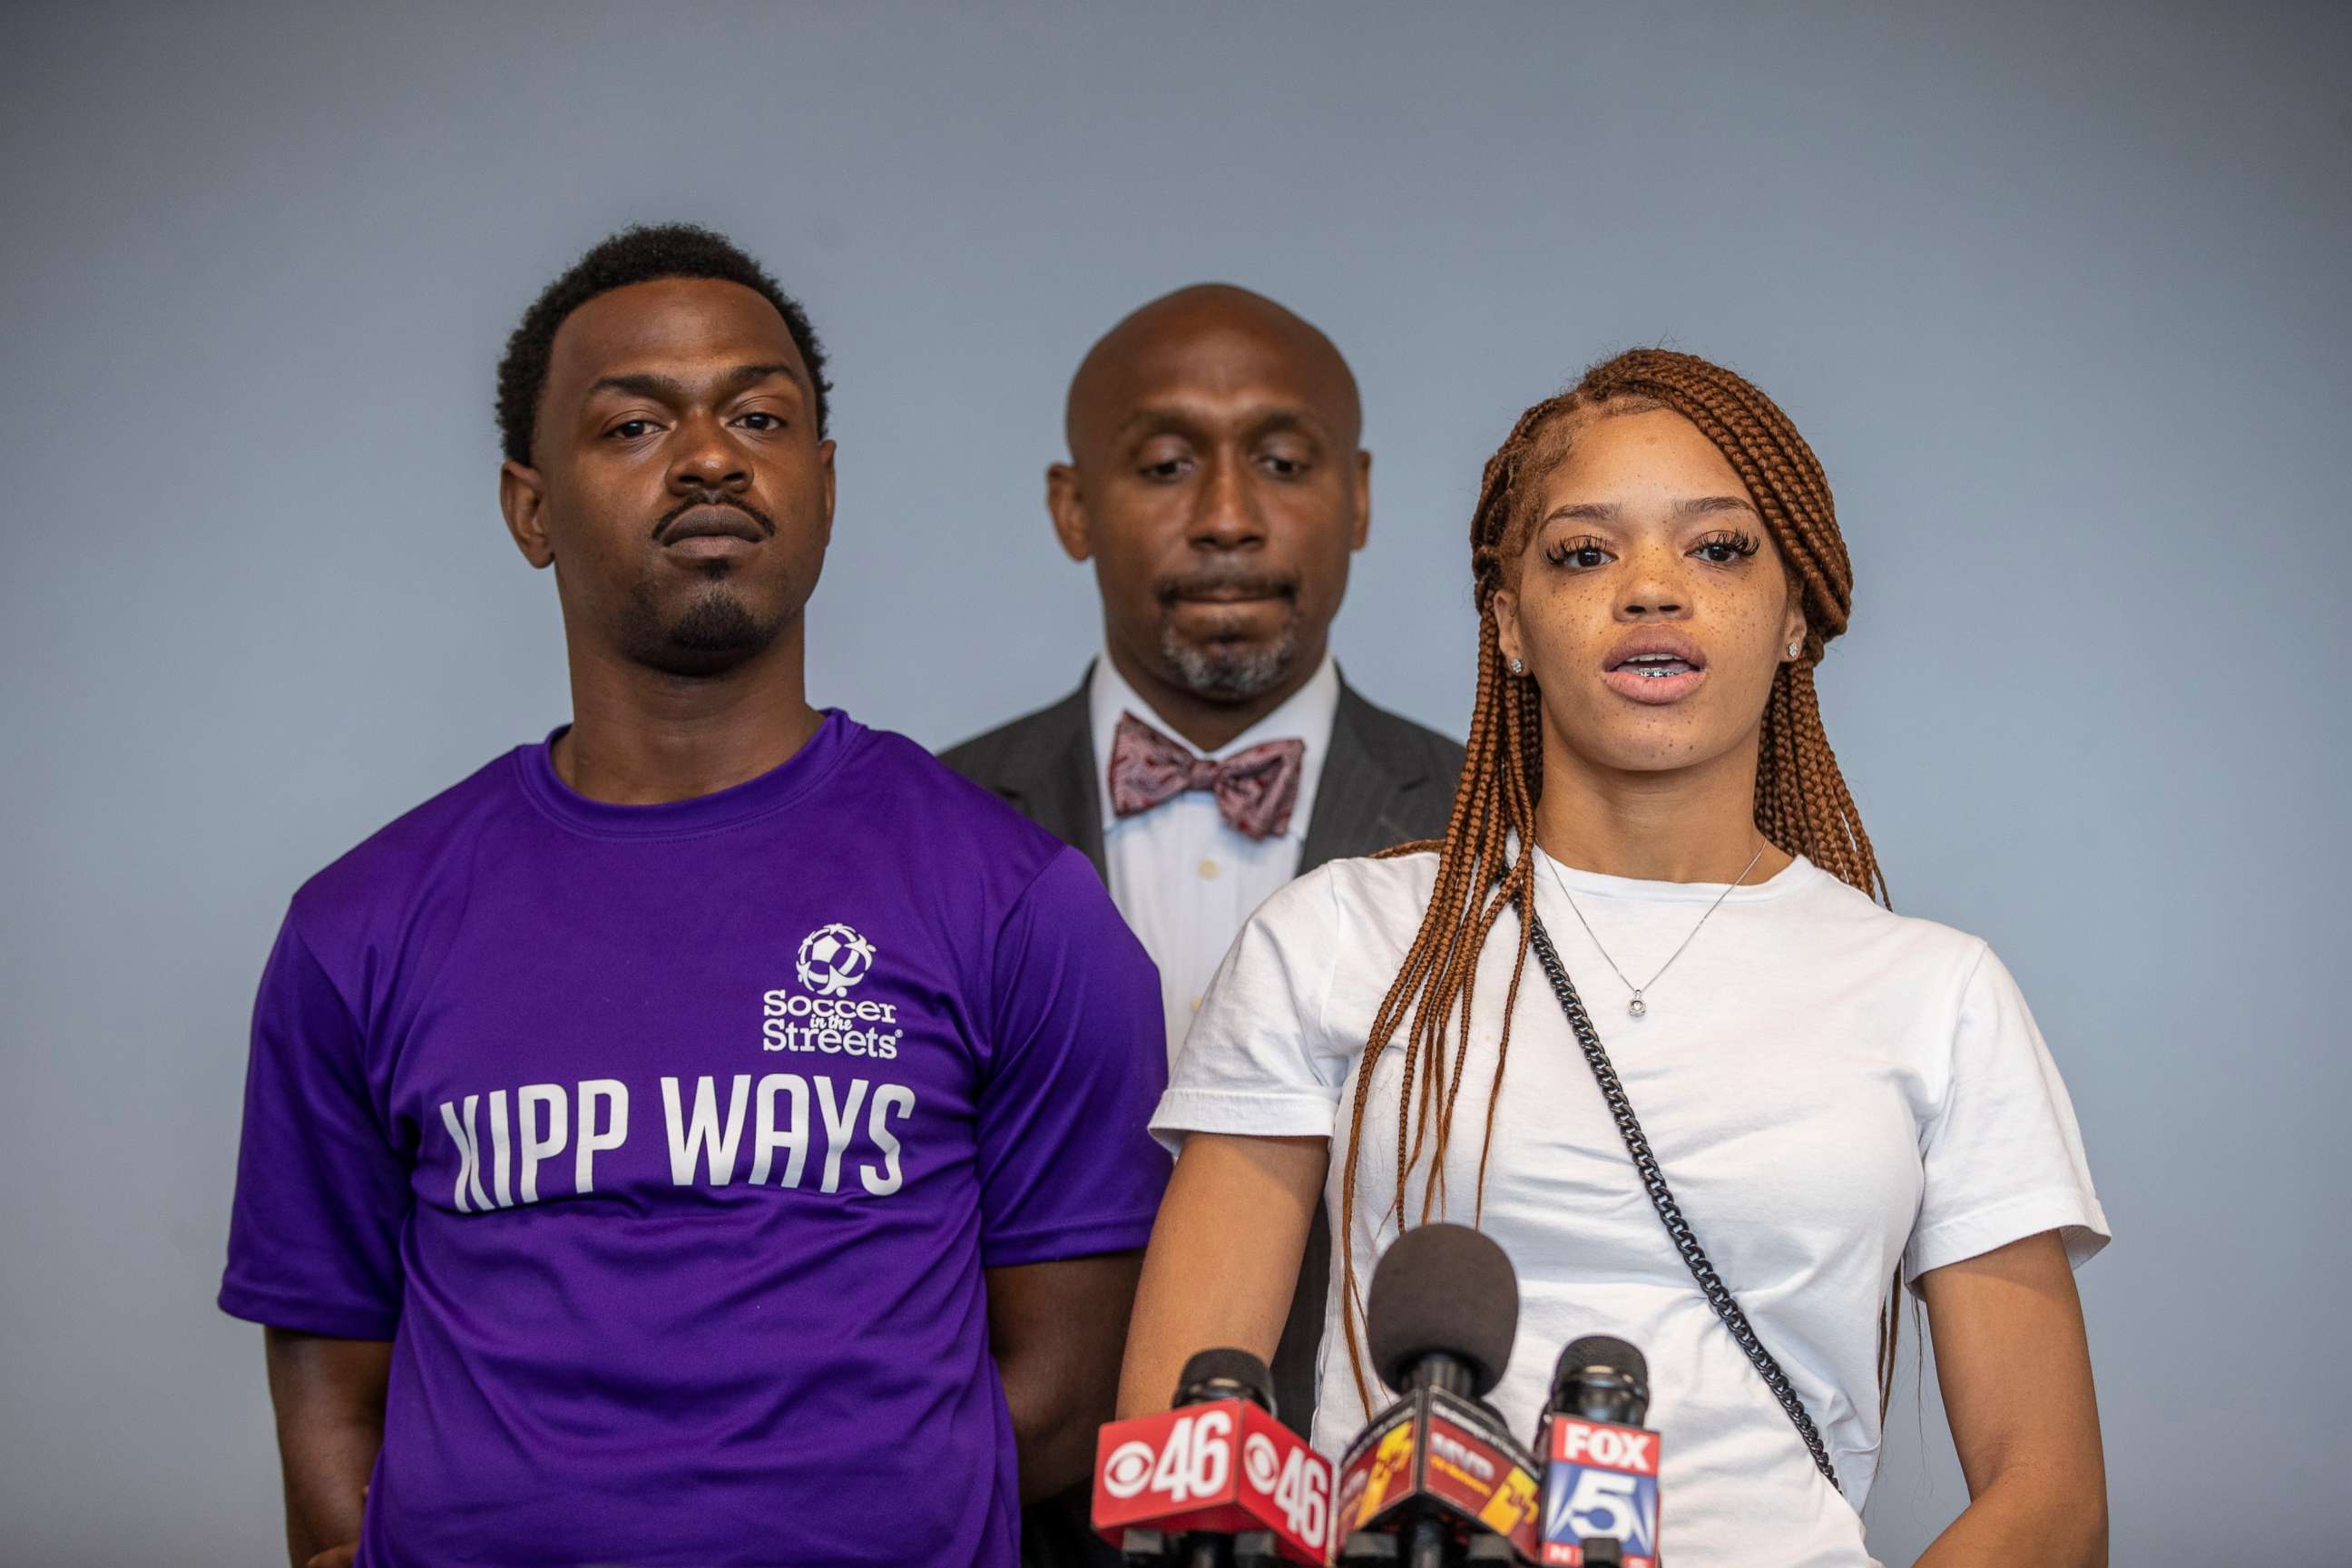 PHOTO: Attorney Mawuli Davis, center, stands with his clients, parents of Secoriea Turner, as they speak during a press conference to announce a lawsuit against the city of Atlanta, June 7, 2021.